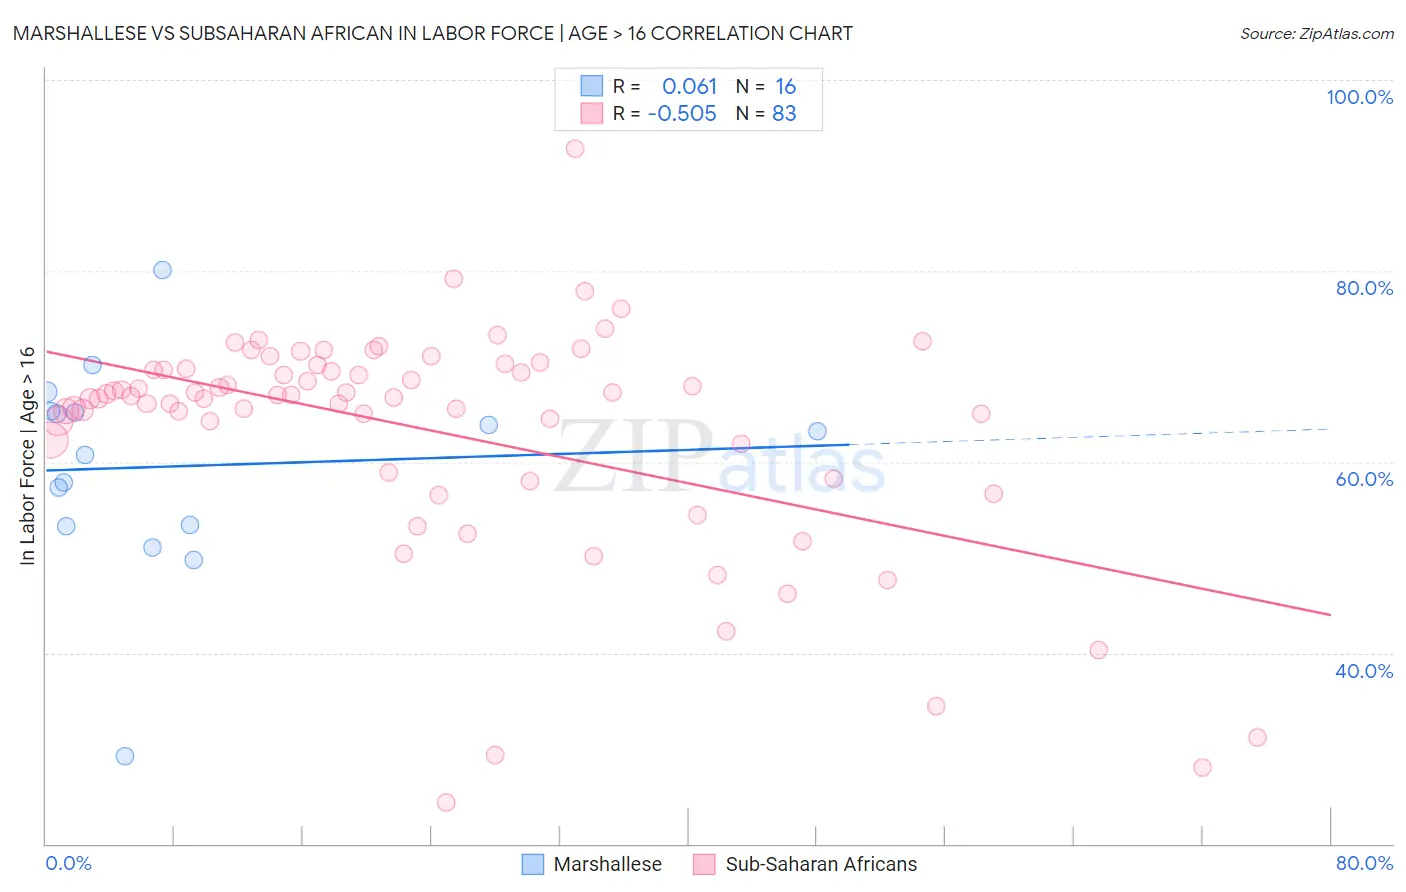 Marshallese vs Subsaharan African In Labor Force | Age > 16